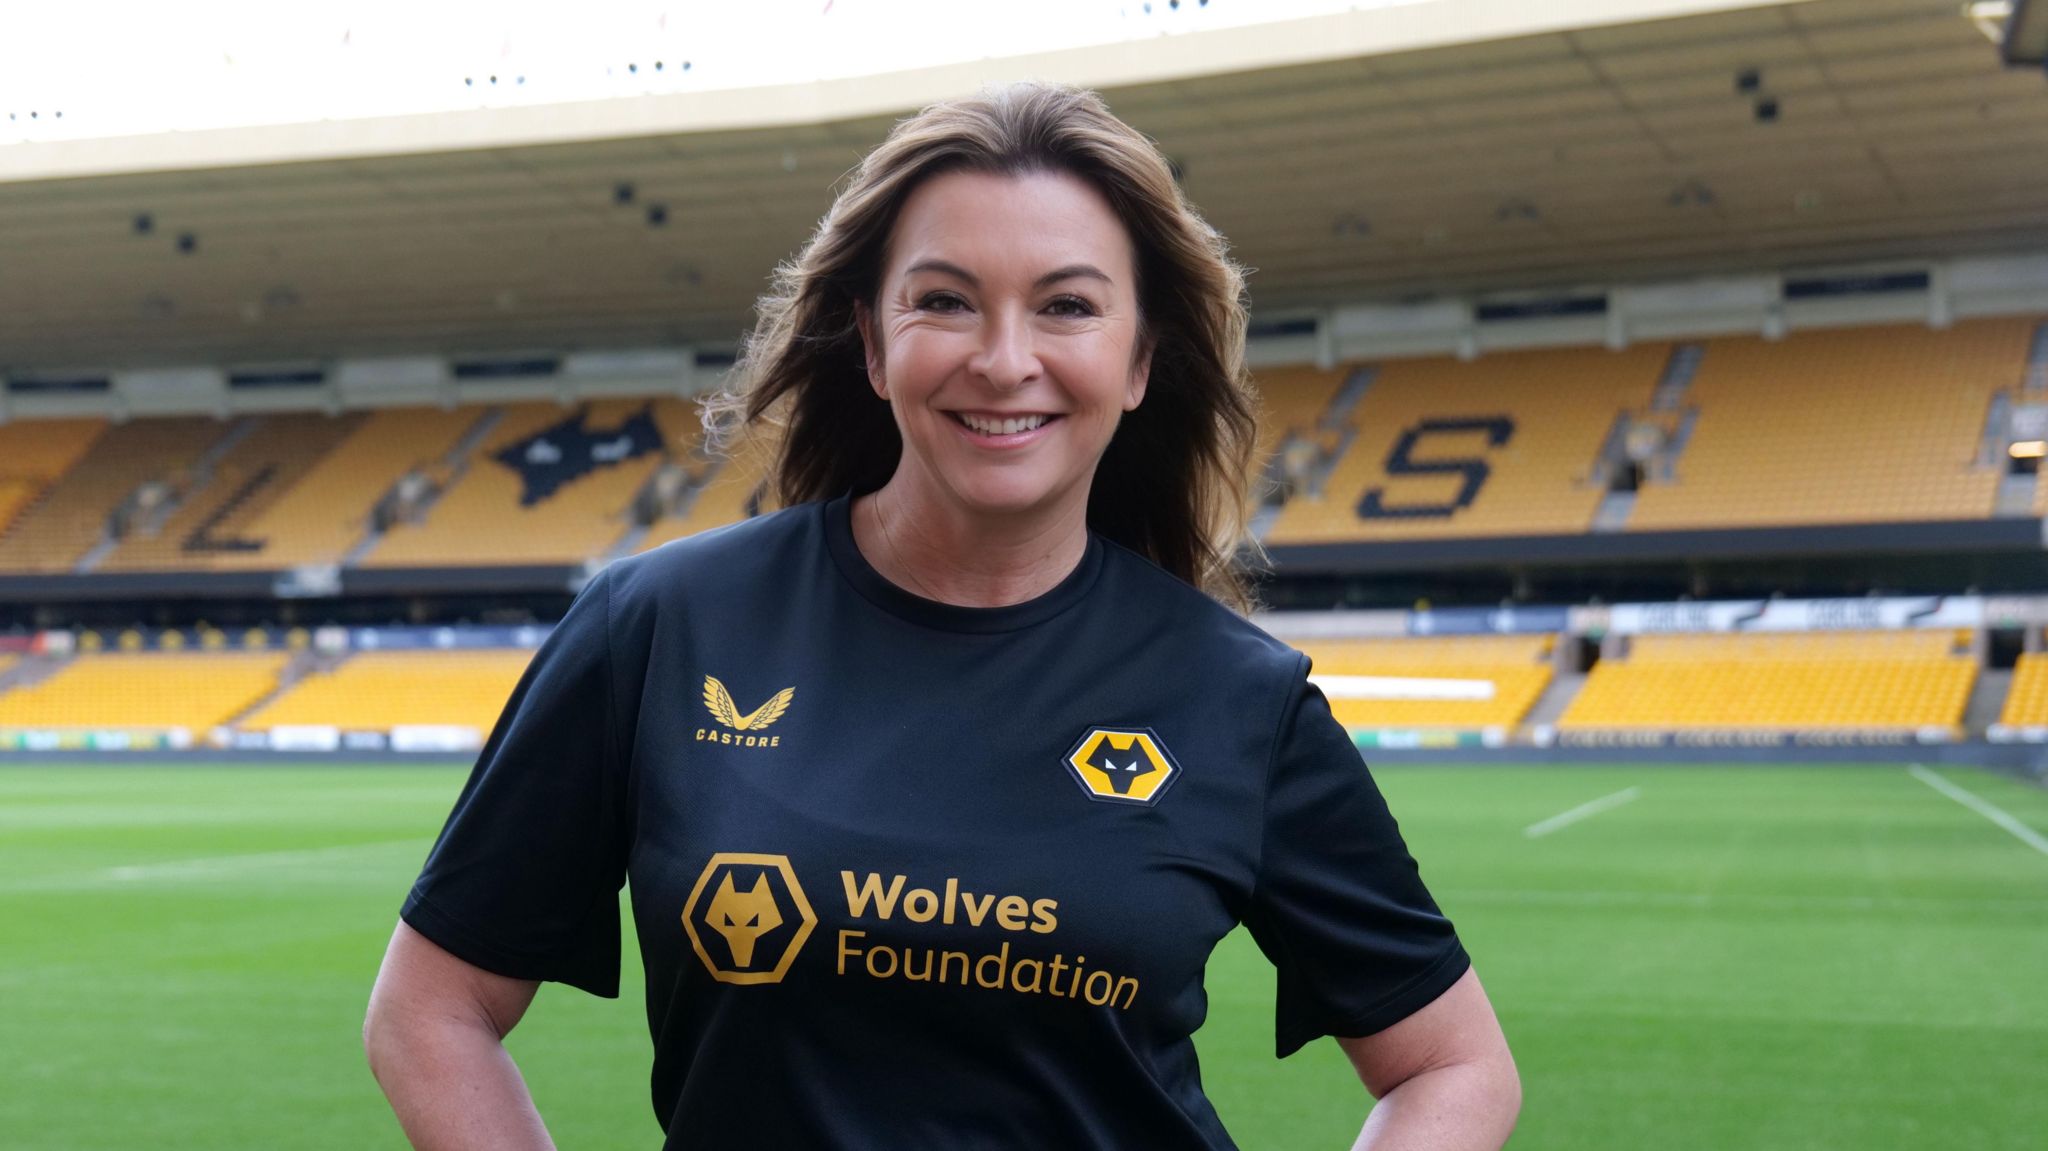 Suzi Perry at Molineux stadium in a Wolves Foundation shirt